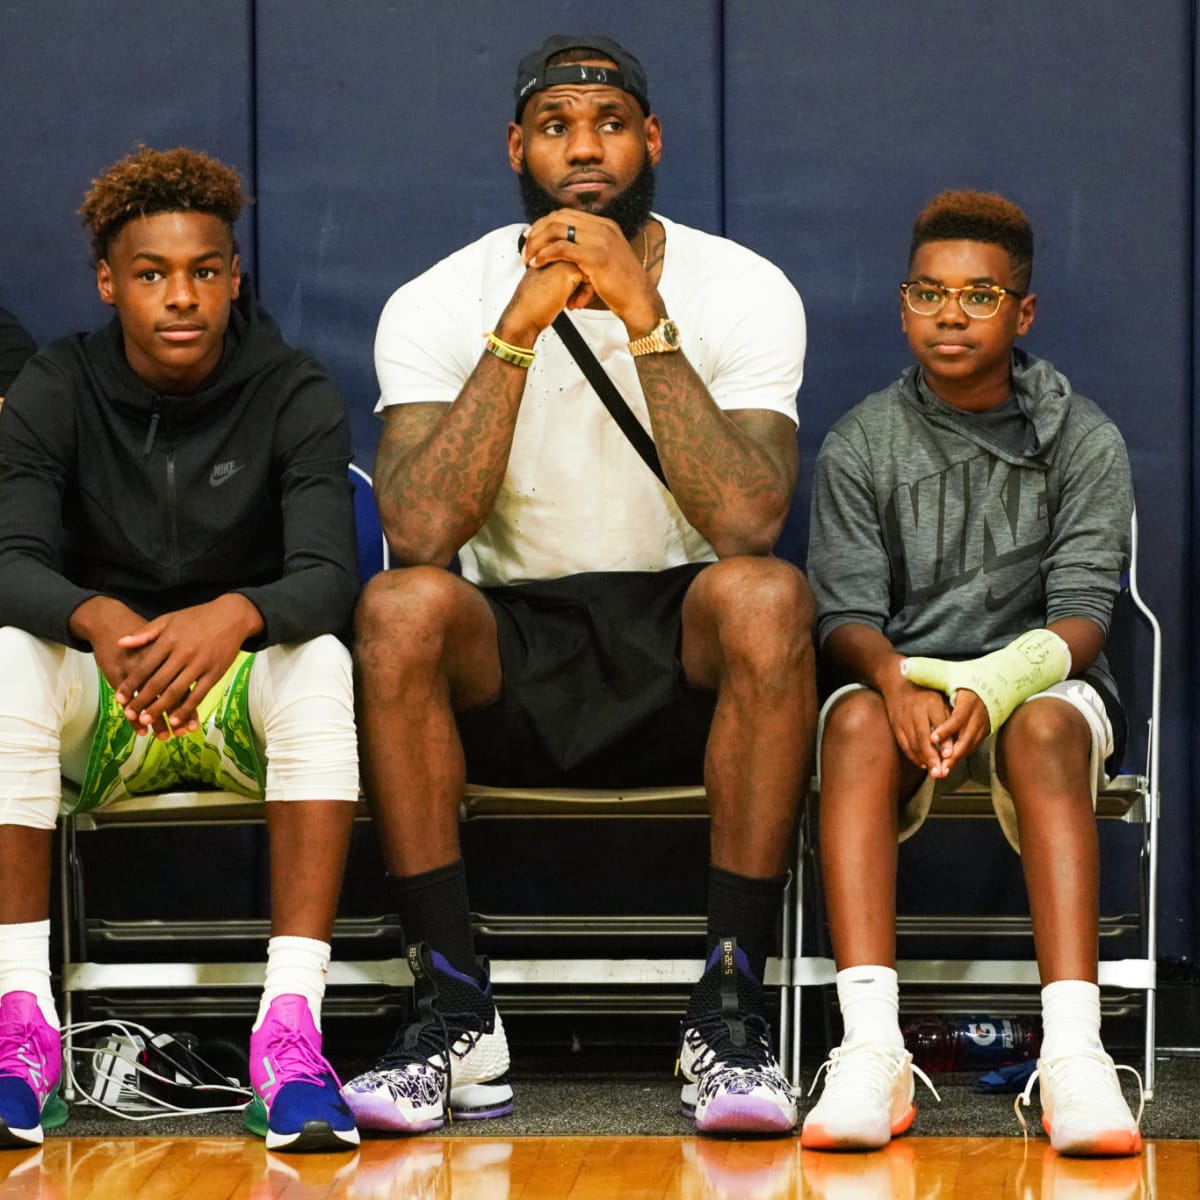 Bronny and Bryce James' 2023 height: how tall are LeBron James' sons?